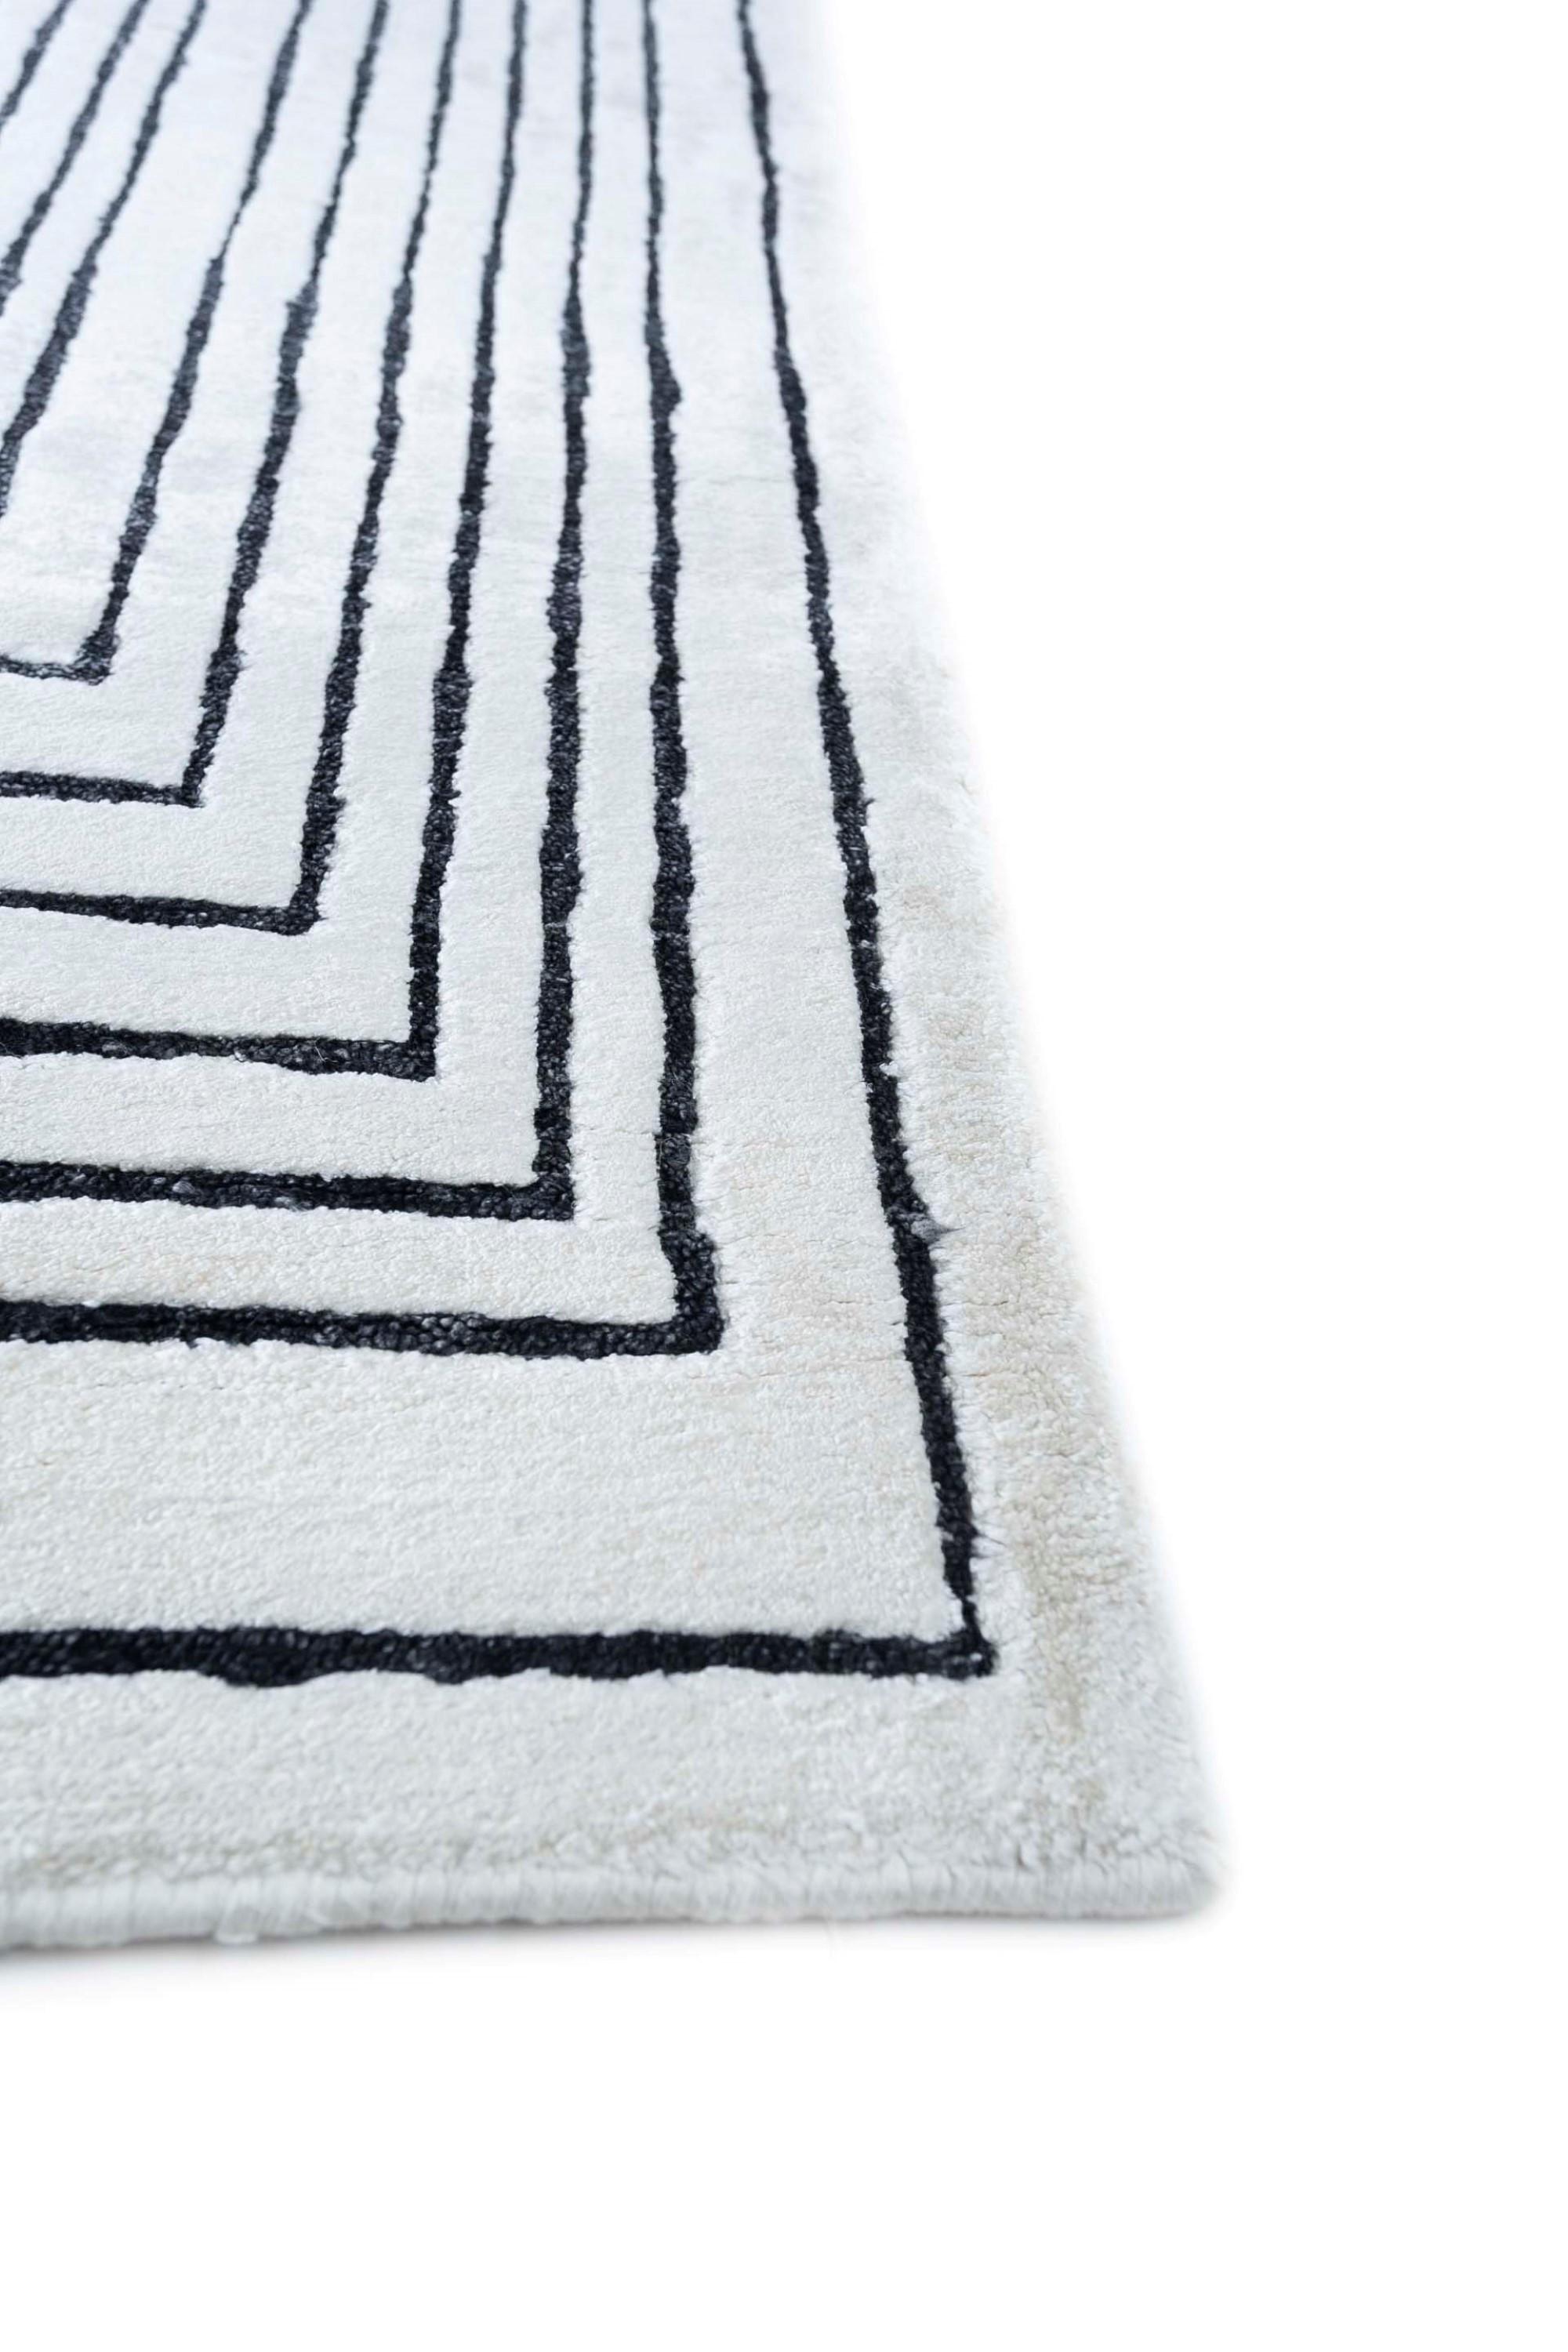 What if your rug could be a mood-lifter for your space? Introducing this hand-knotted marvel . With a soothing tone-on-tone palette, this modern rug, handcrafted with care, instantly uplifts the mood of any room. The white ground and ebony border